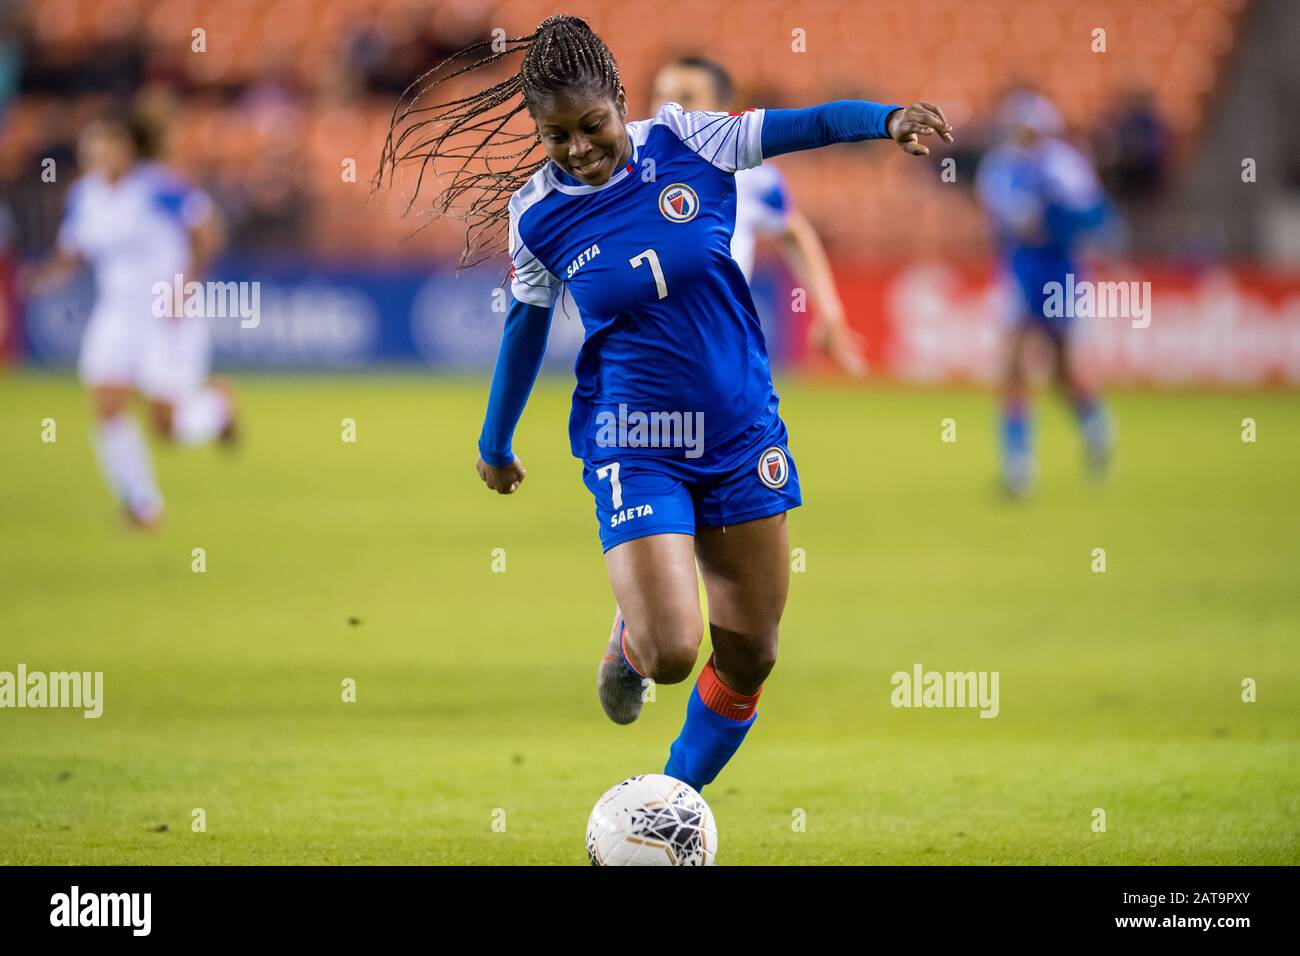 Houston, TX, USA. 31st Jan, 2020. Haiti forward Batcheba Louis (7) controls the ball during the 2nd half of a CONCACAF Olympic Qualifying soccer match between Haiti and Costa Rica at BBVA Stadium in Houston, TX. Costa Rica won the game 2 to 0.Trask Smith/CSM/Alamy Live News Stock Photo